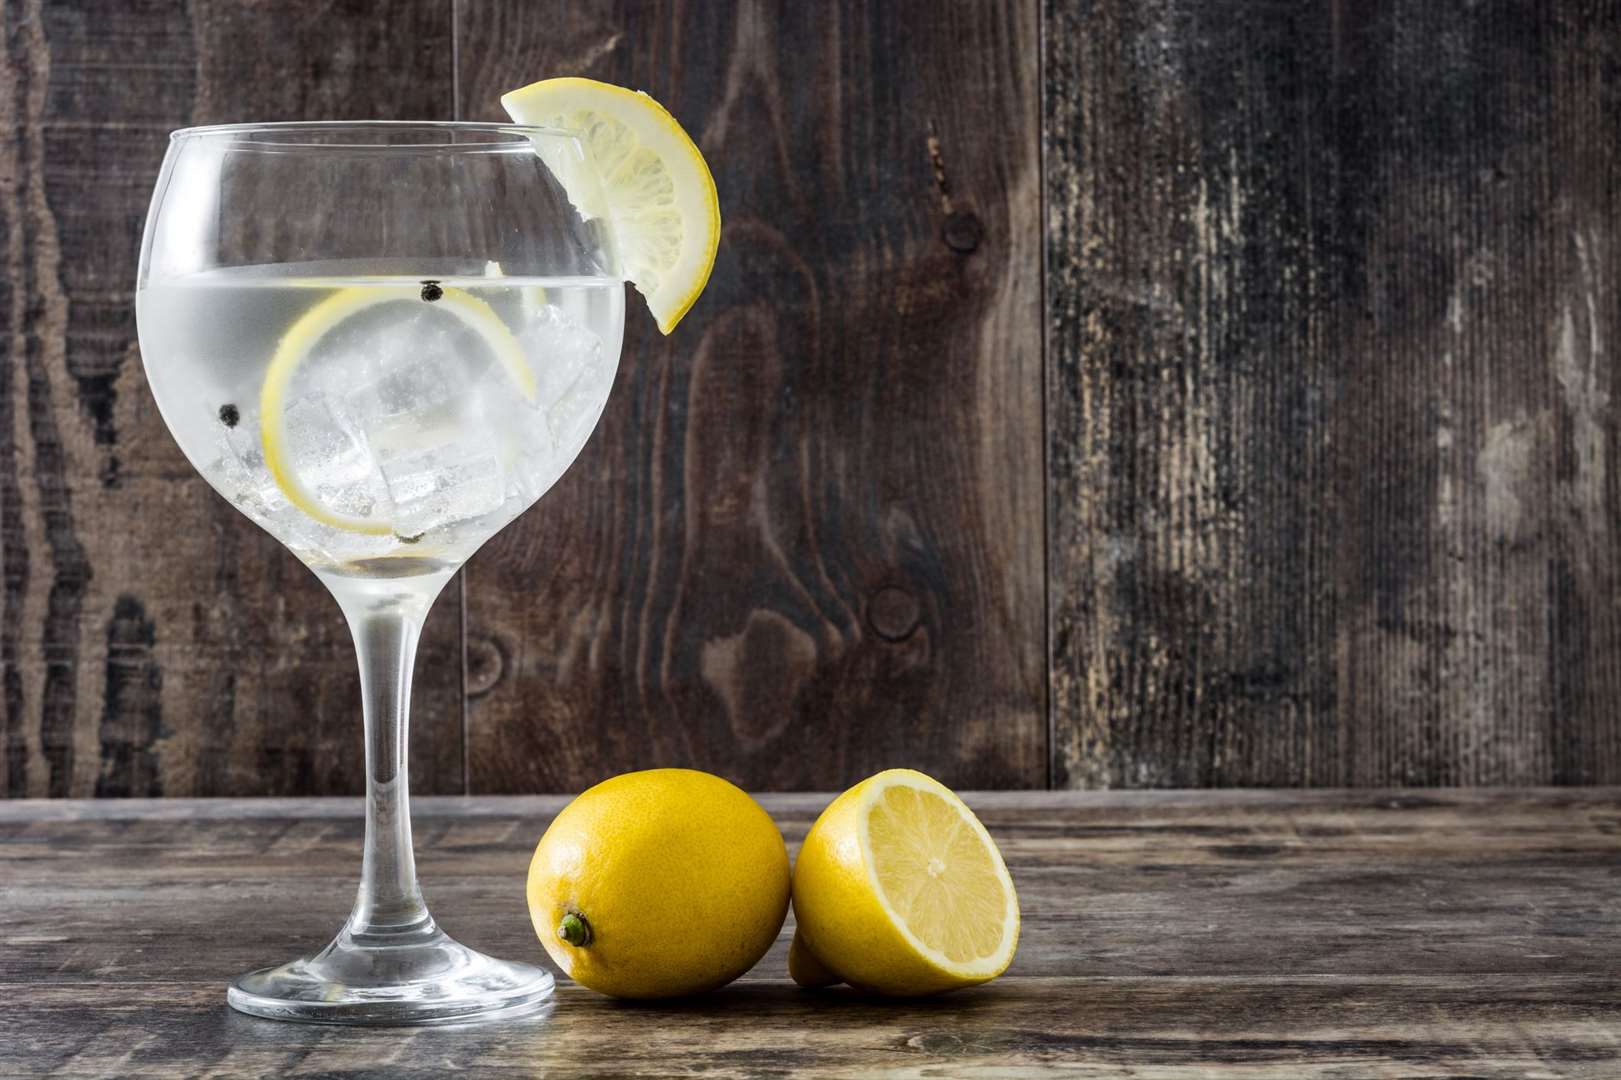 Raise a glass to gin on World Gin Day